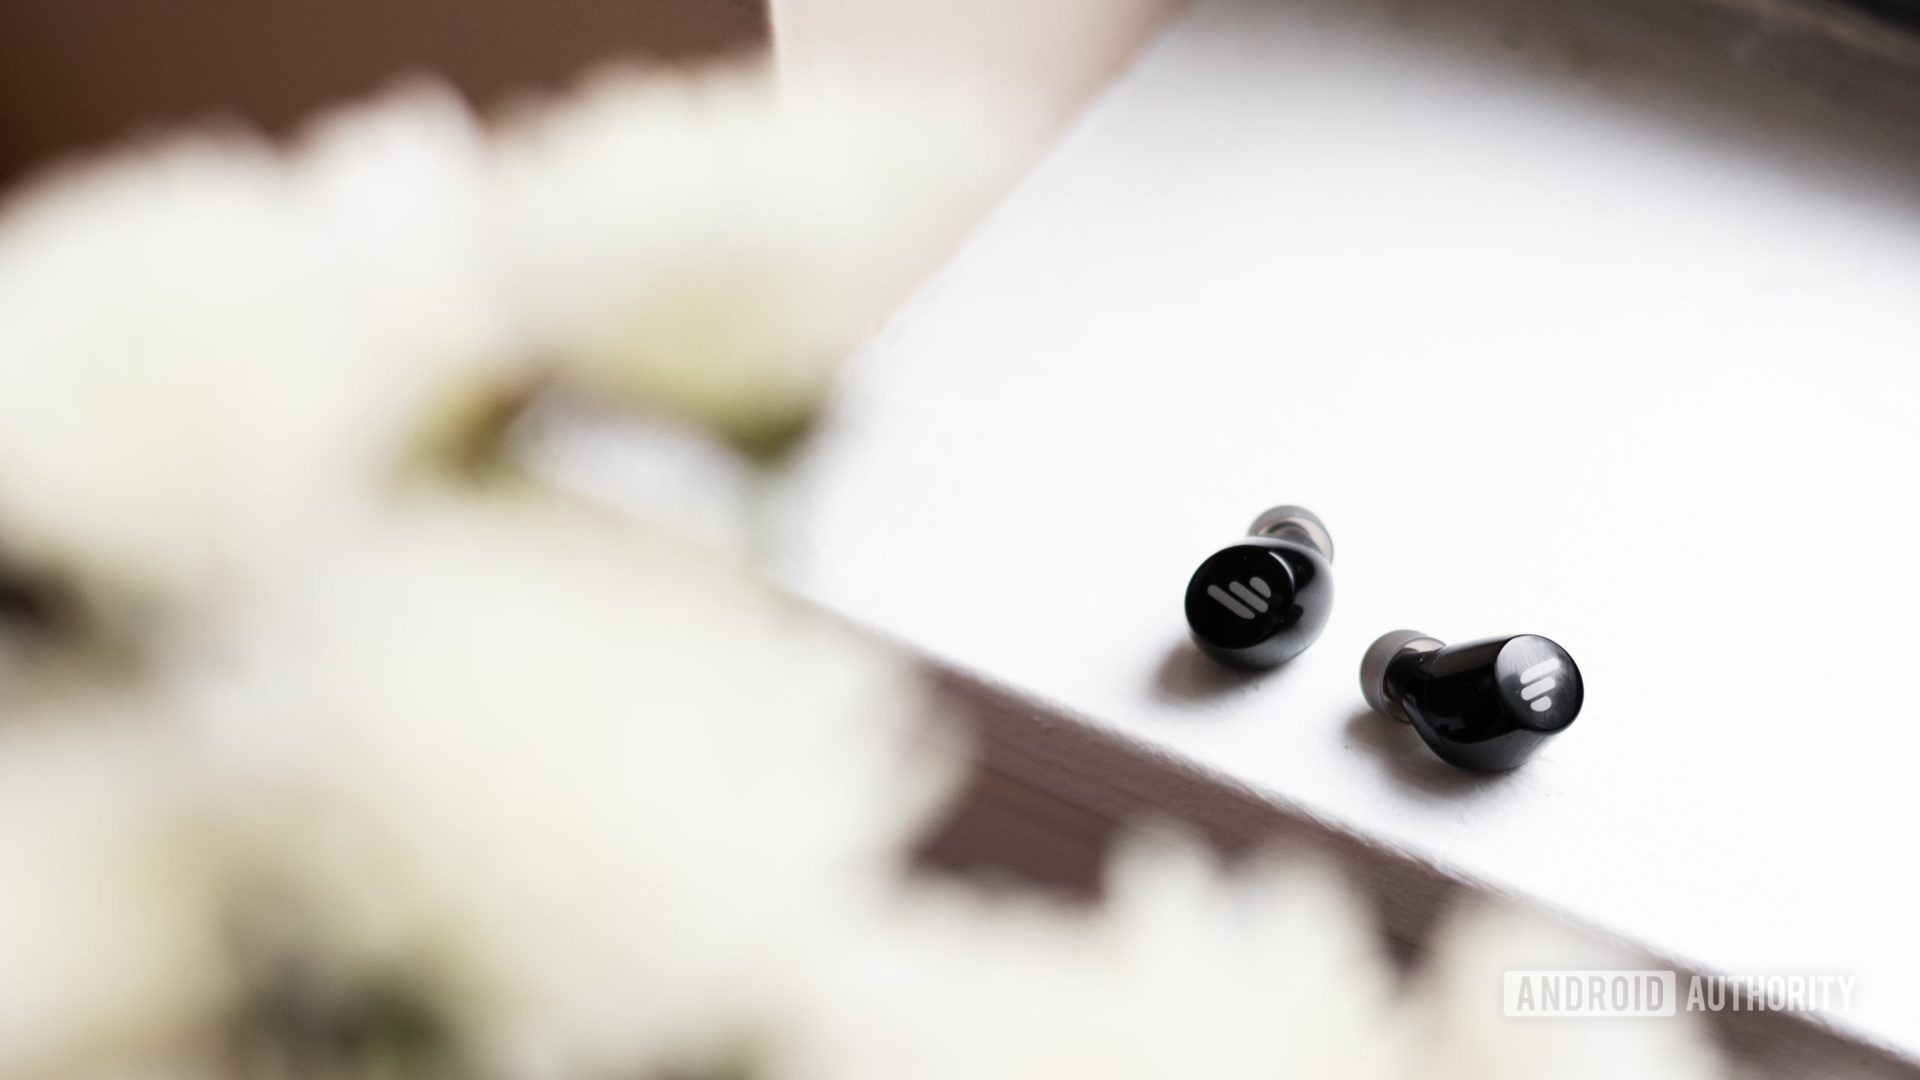 A picture of the Edifier TWS1 true wireless earbuds on a windowsill with flowers in the foreground.